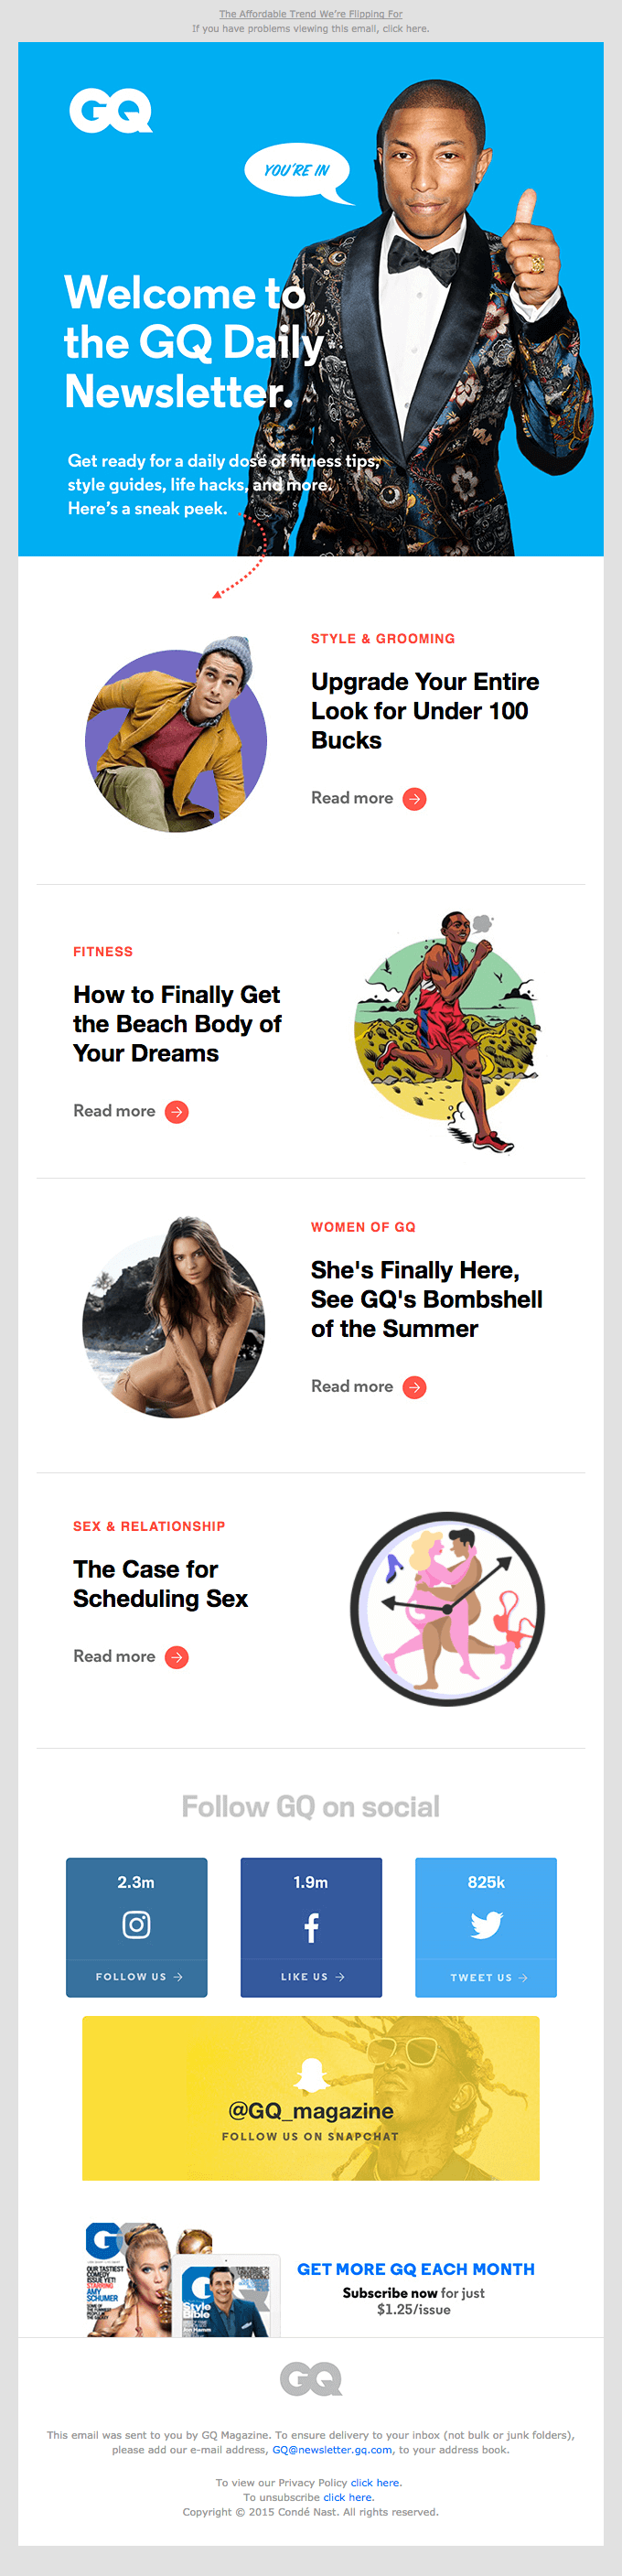 GQ email example